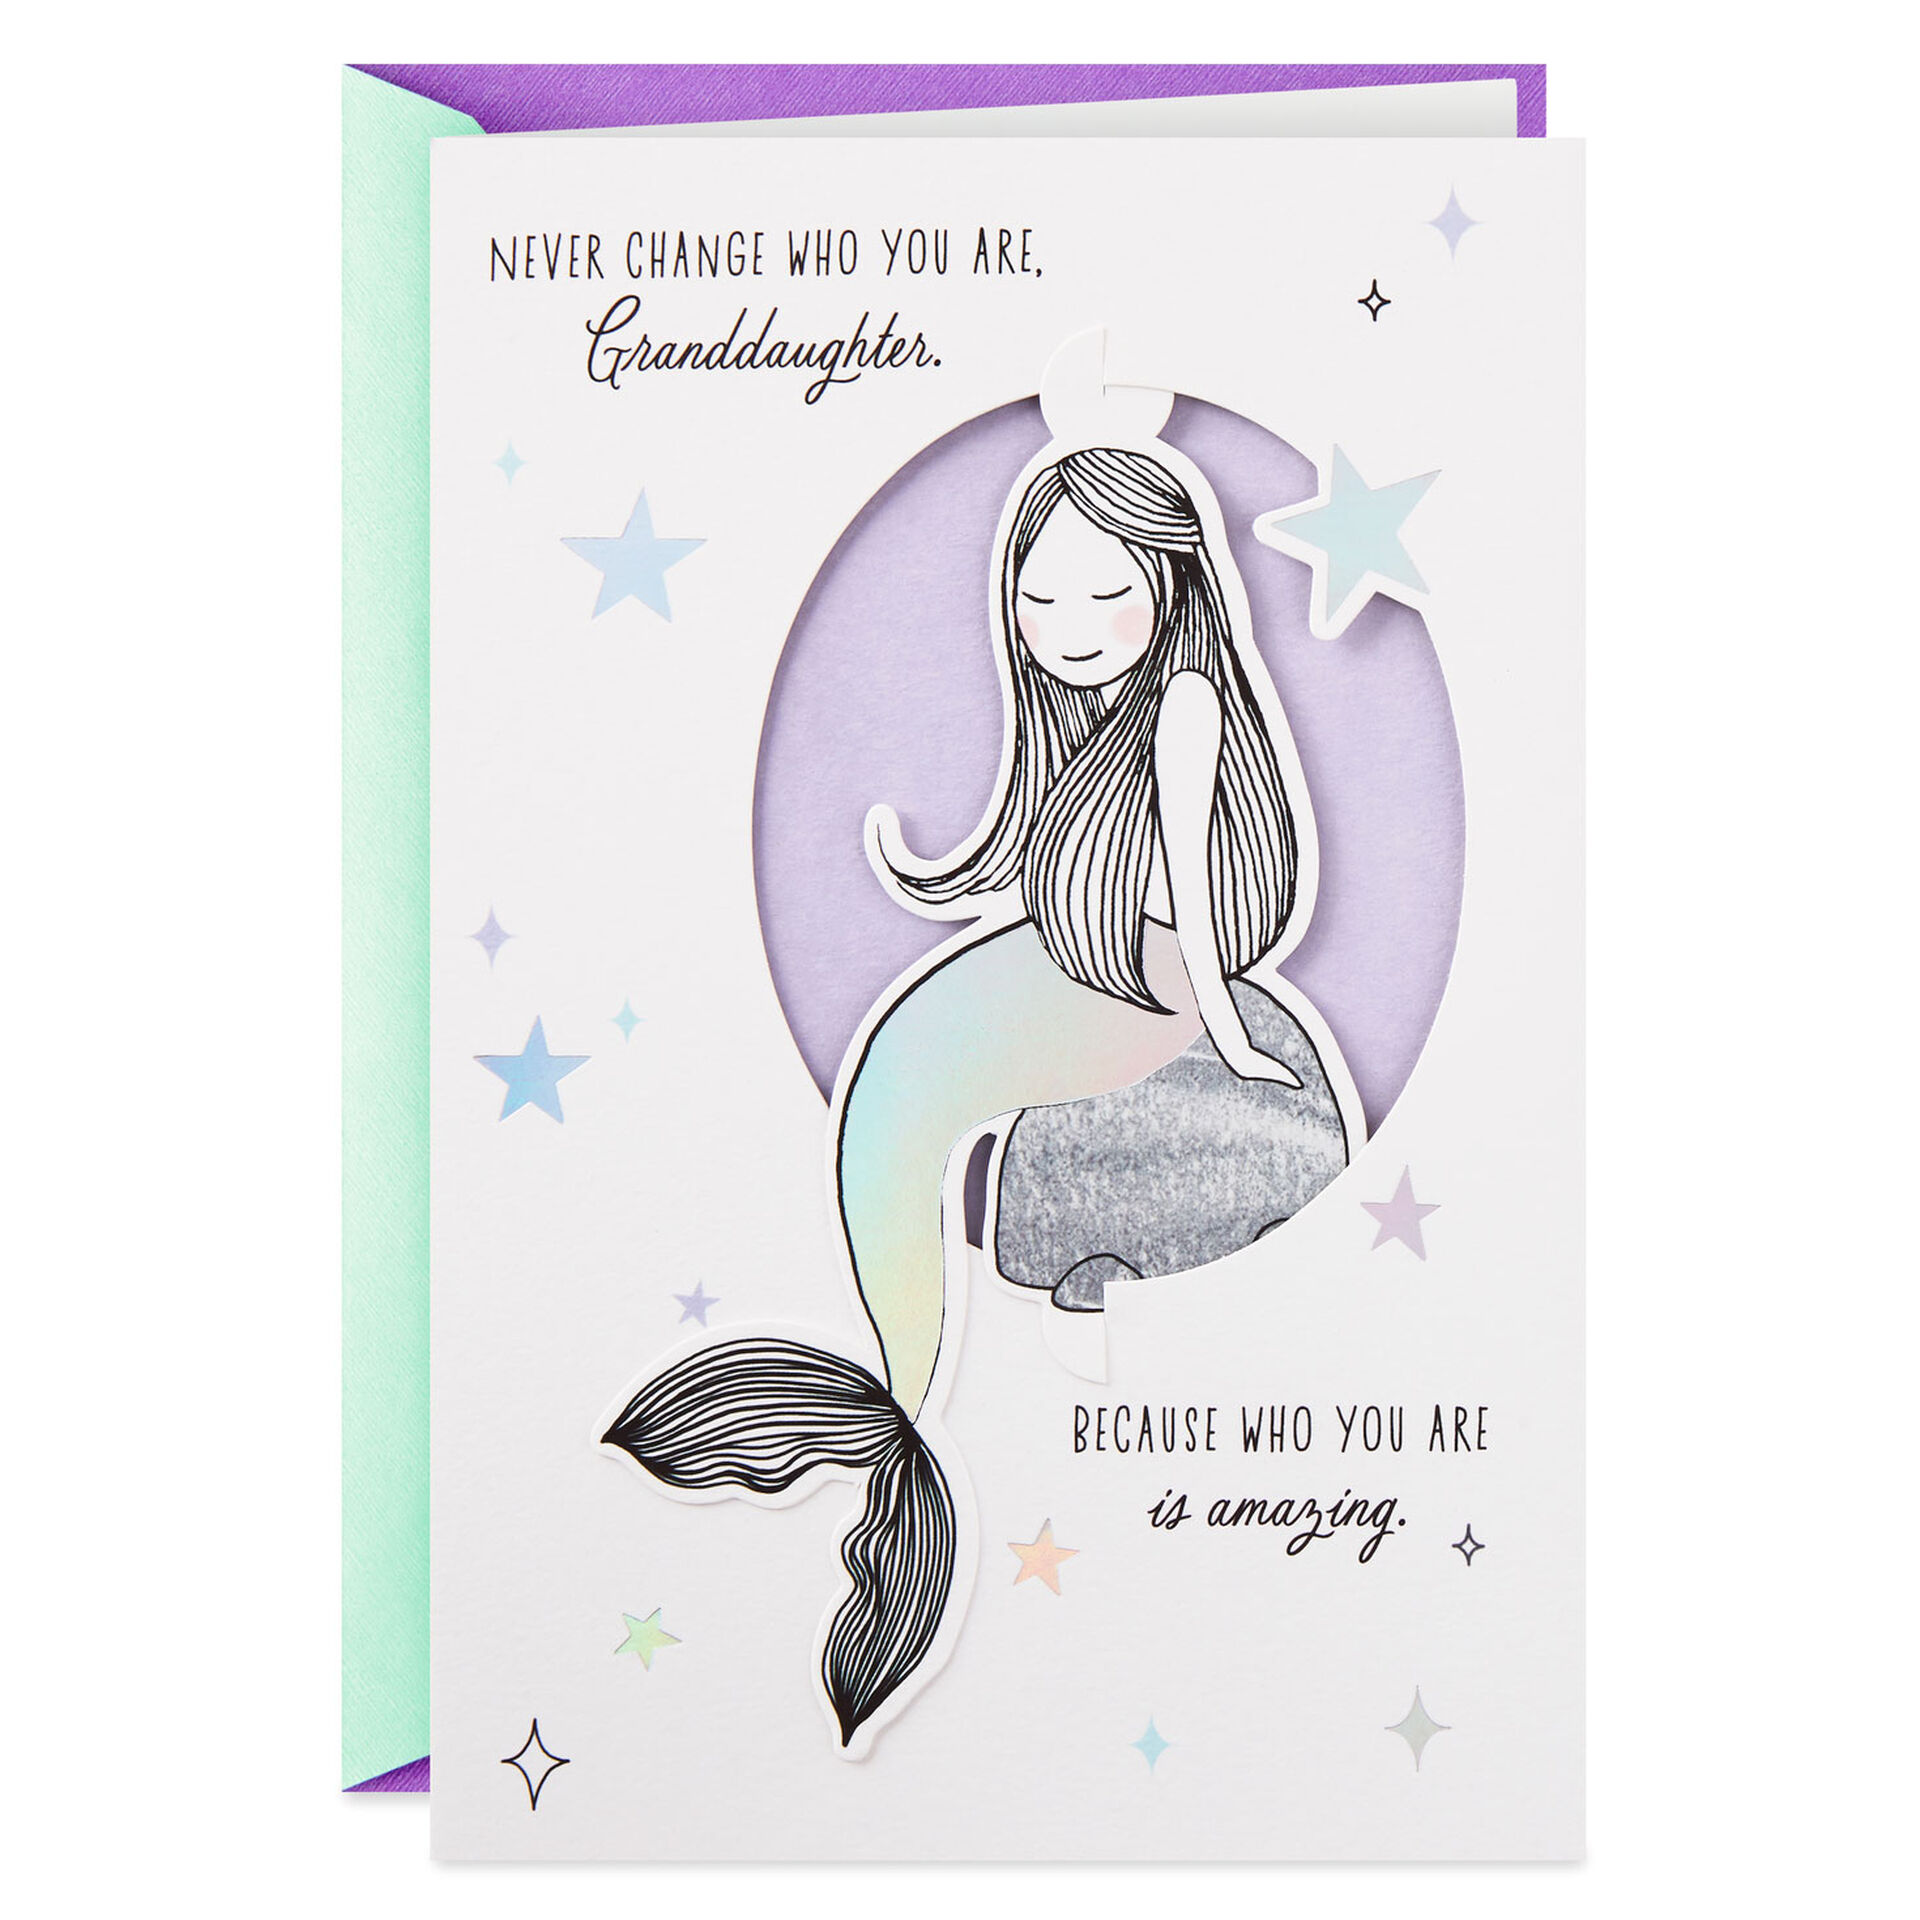 Mermaid-and-Stars-Birthday-Card-for-Granddaughter_659FBD4359_01